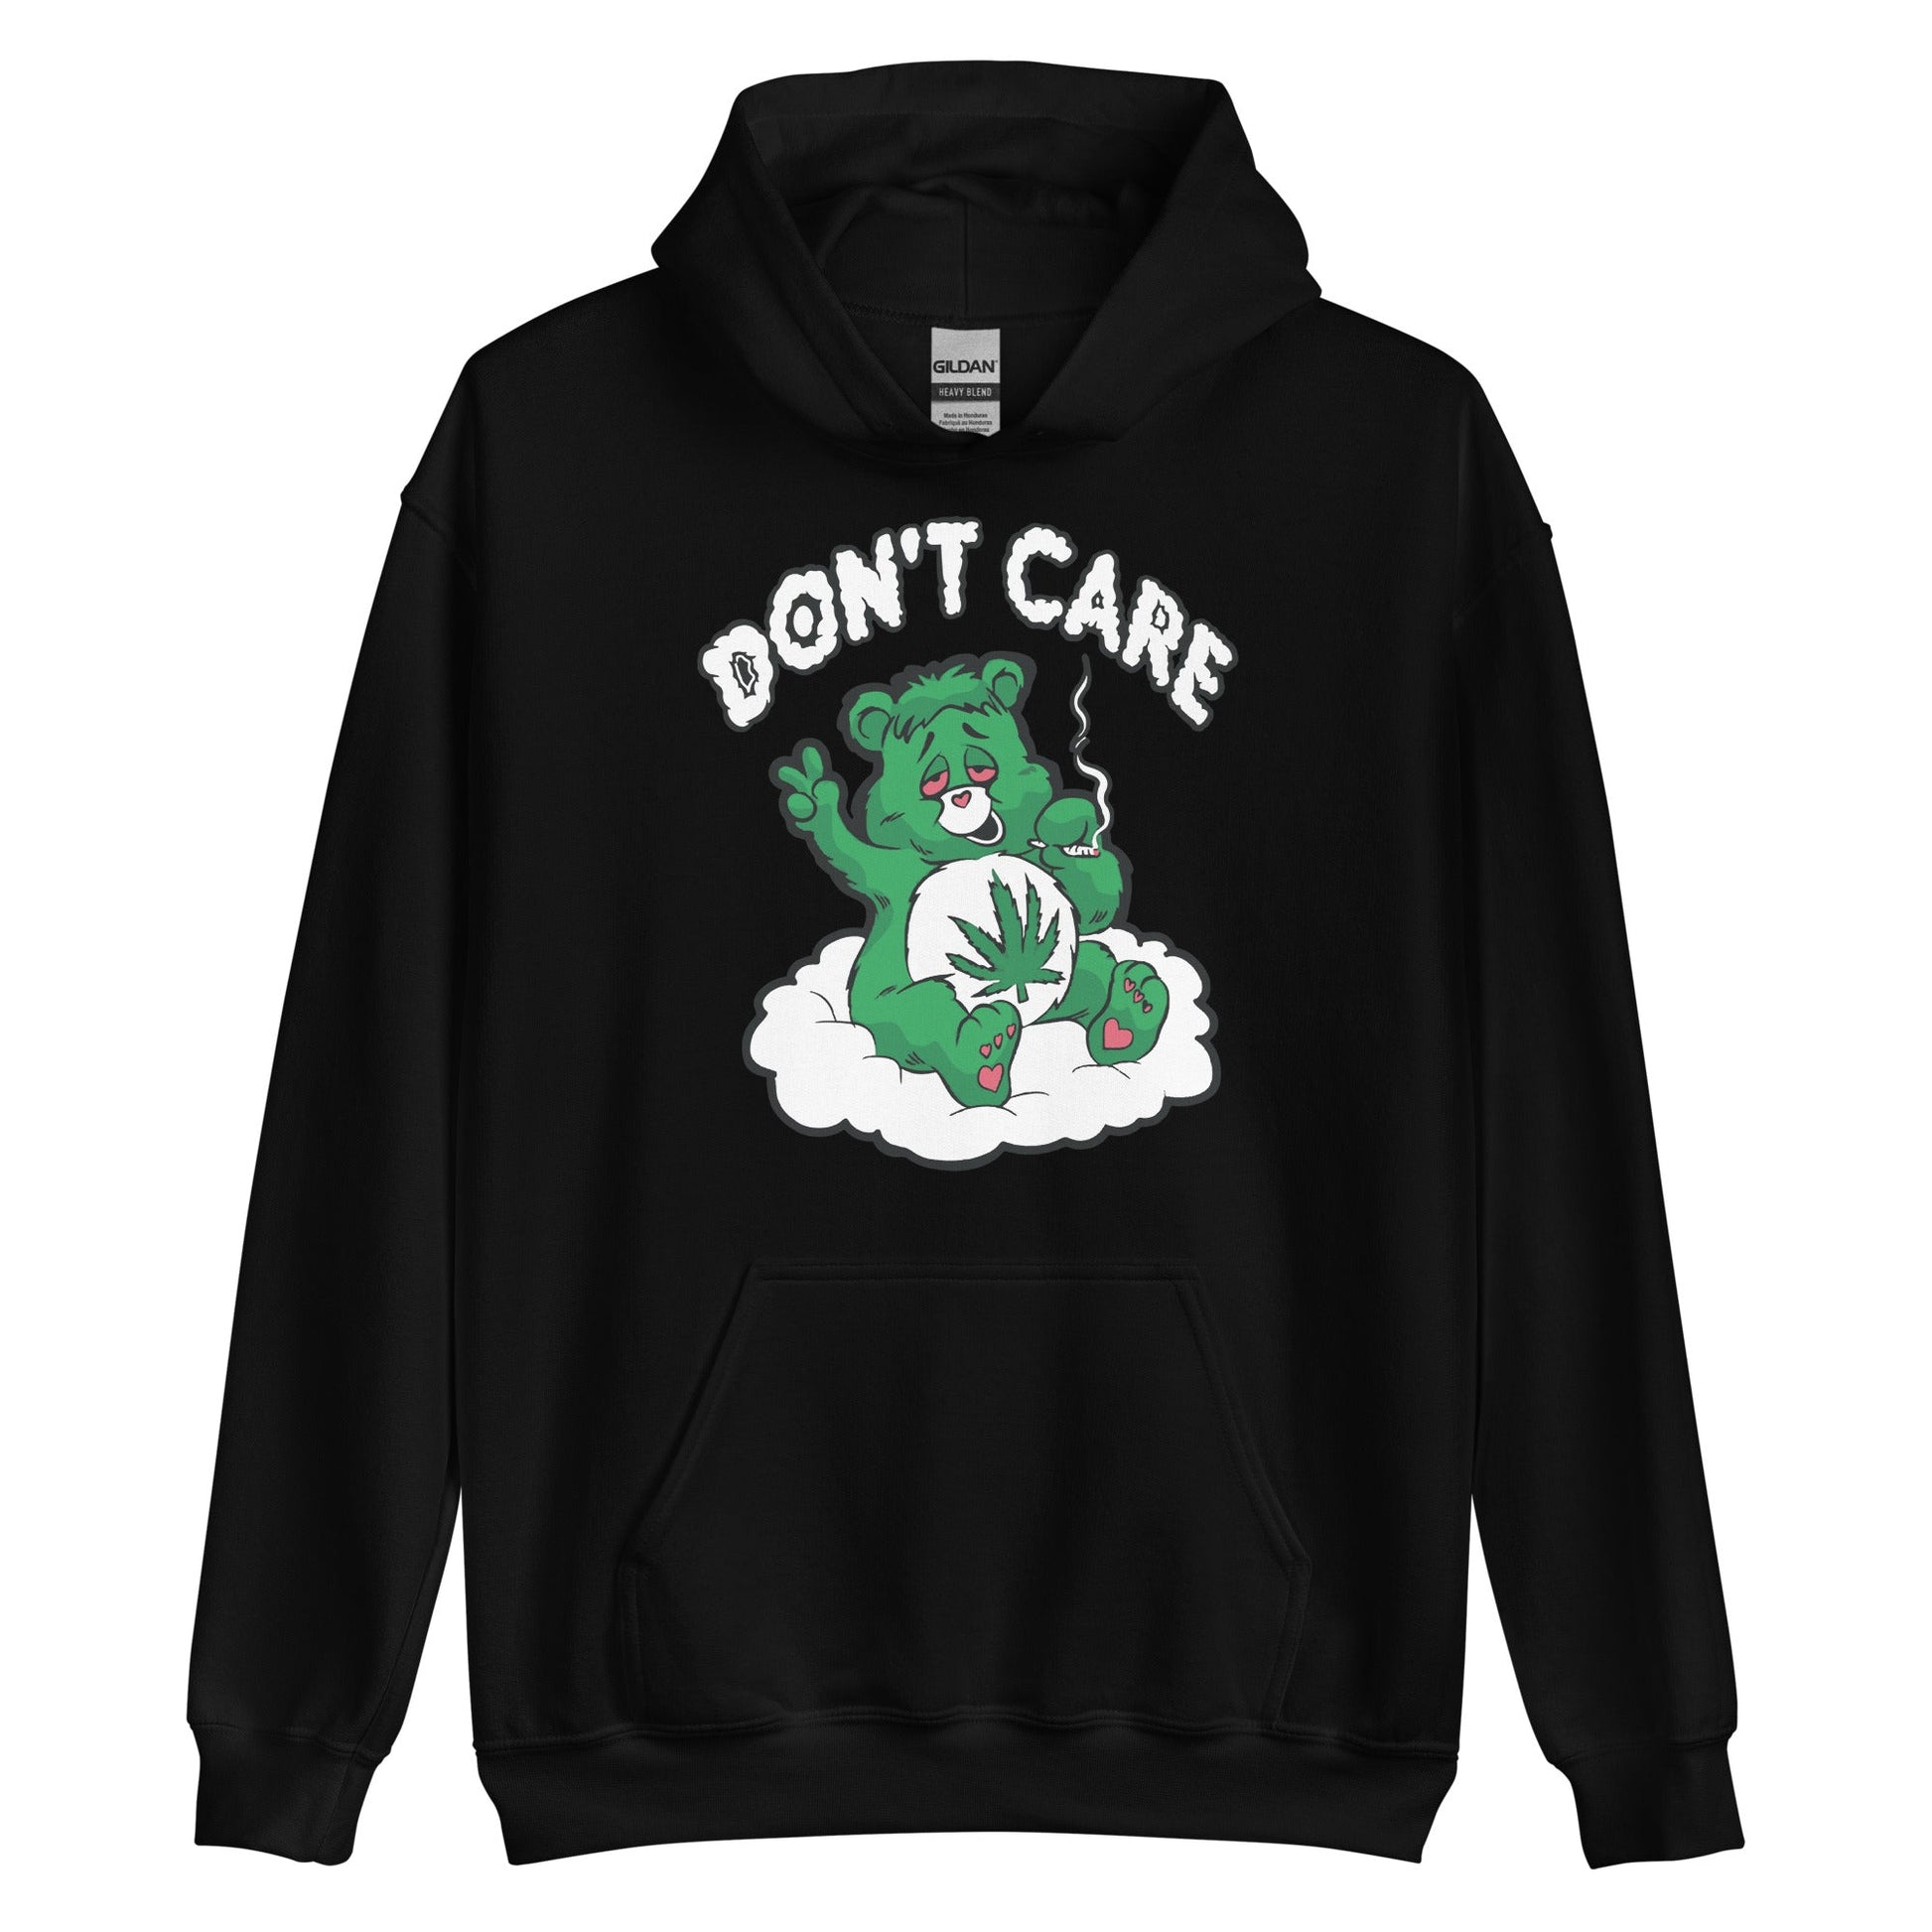 Introducing our cheeky and carefree "I Don't Care Bear" Hoodie, a bold expression of nonchalant attitude and carefree vibes. - The Truth Graphics